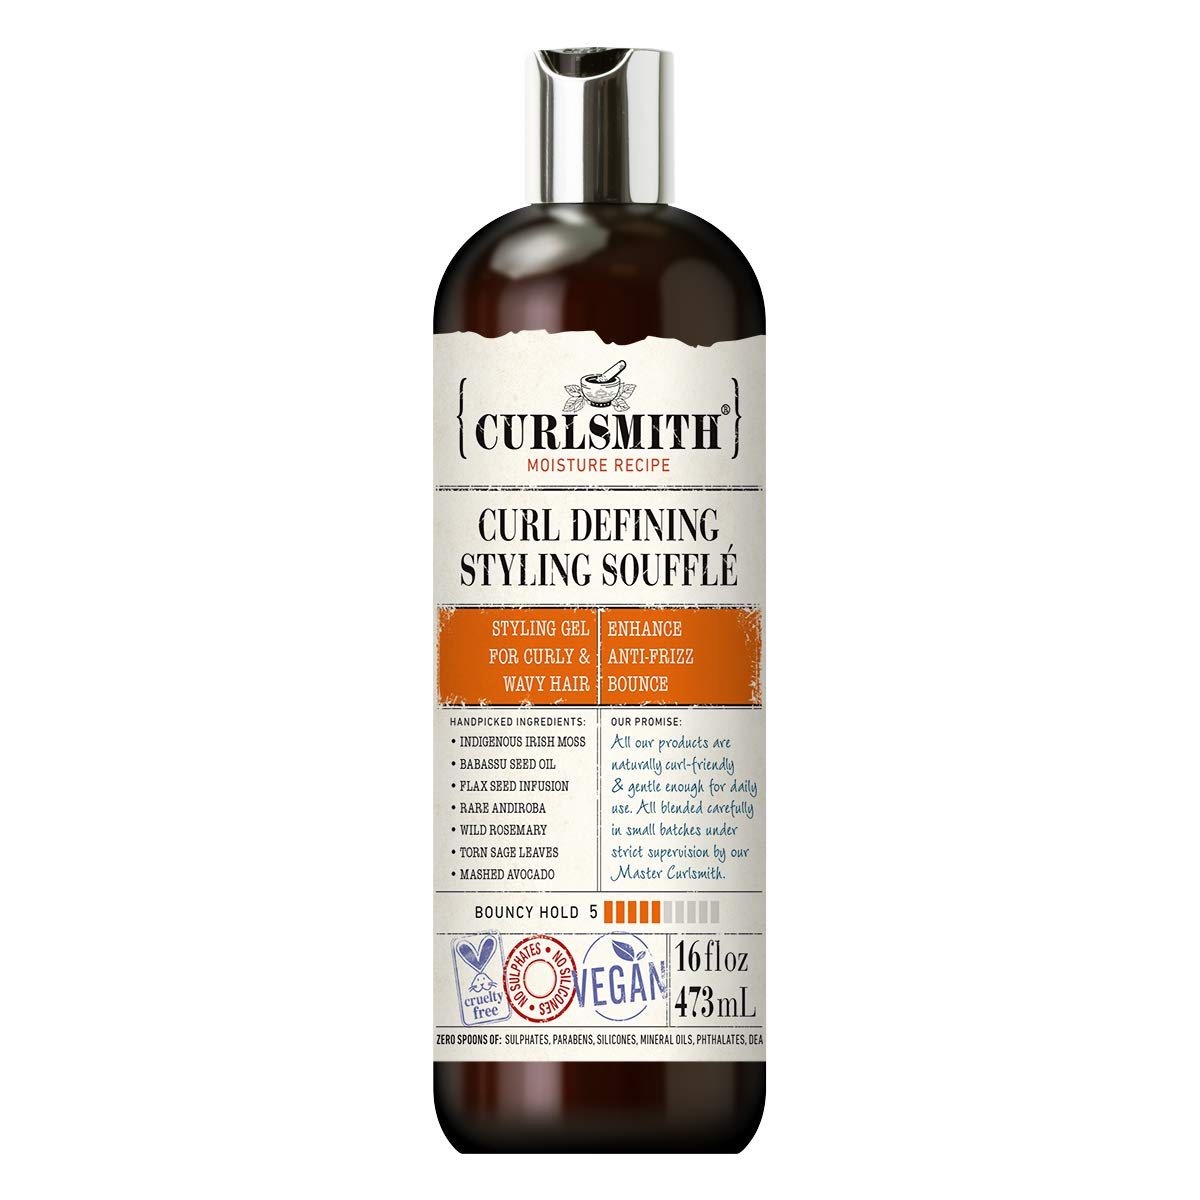 CURLSMITH - Curl Defining Styling Soufflé - Vegan Medium Hold Styling Gel for Wavy, Curly and Coily Hair (16oz)